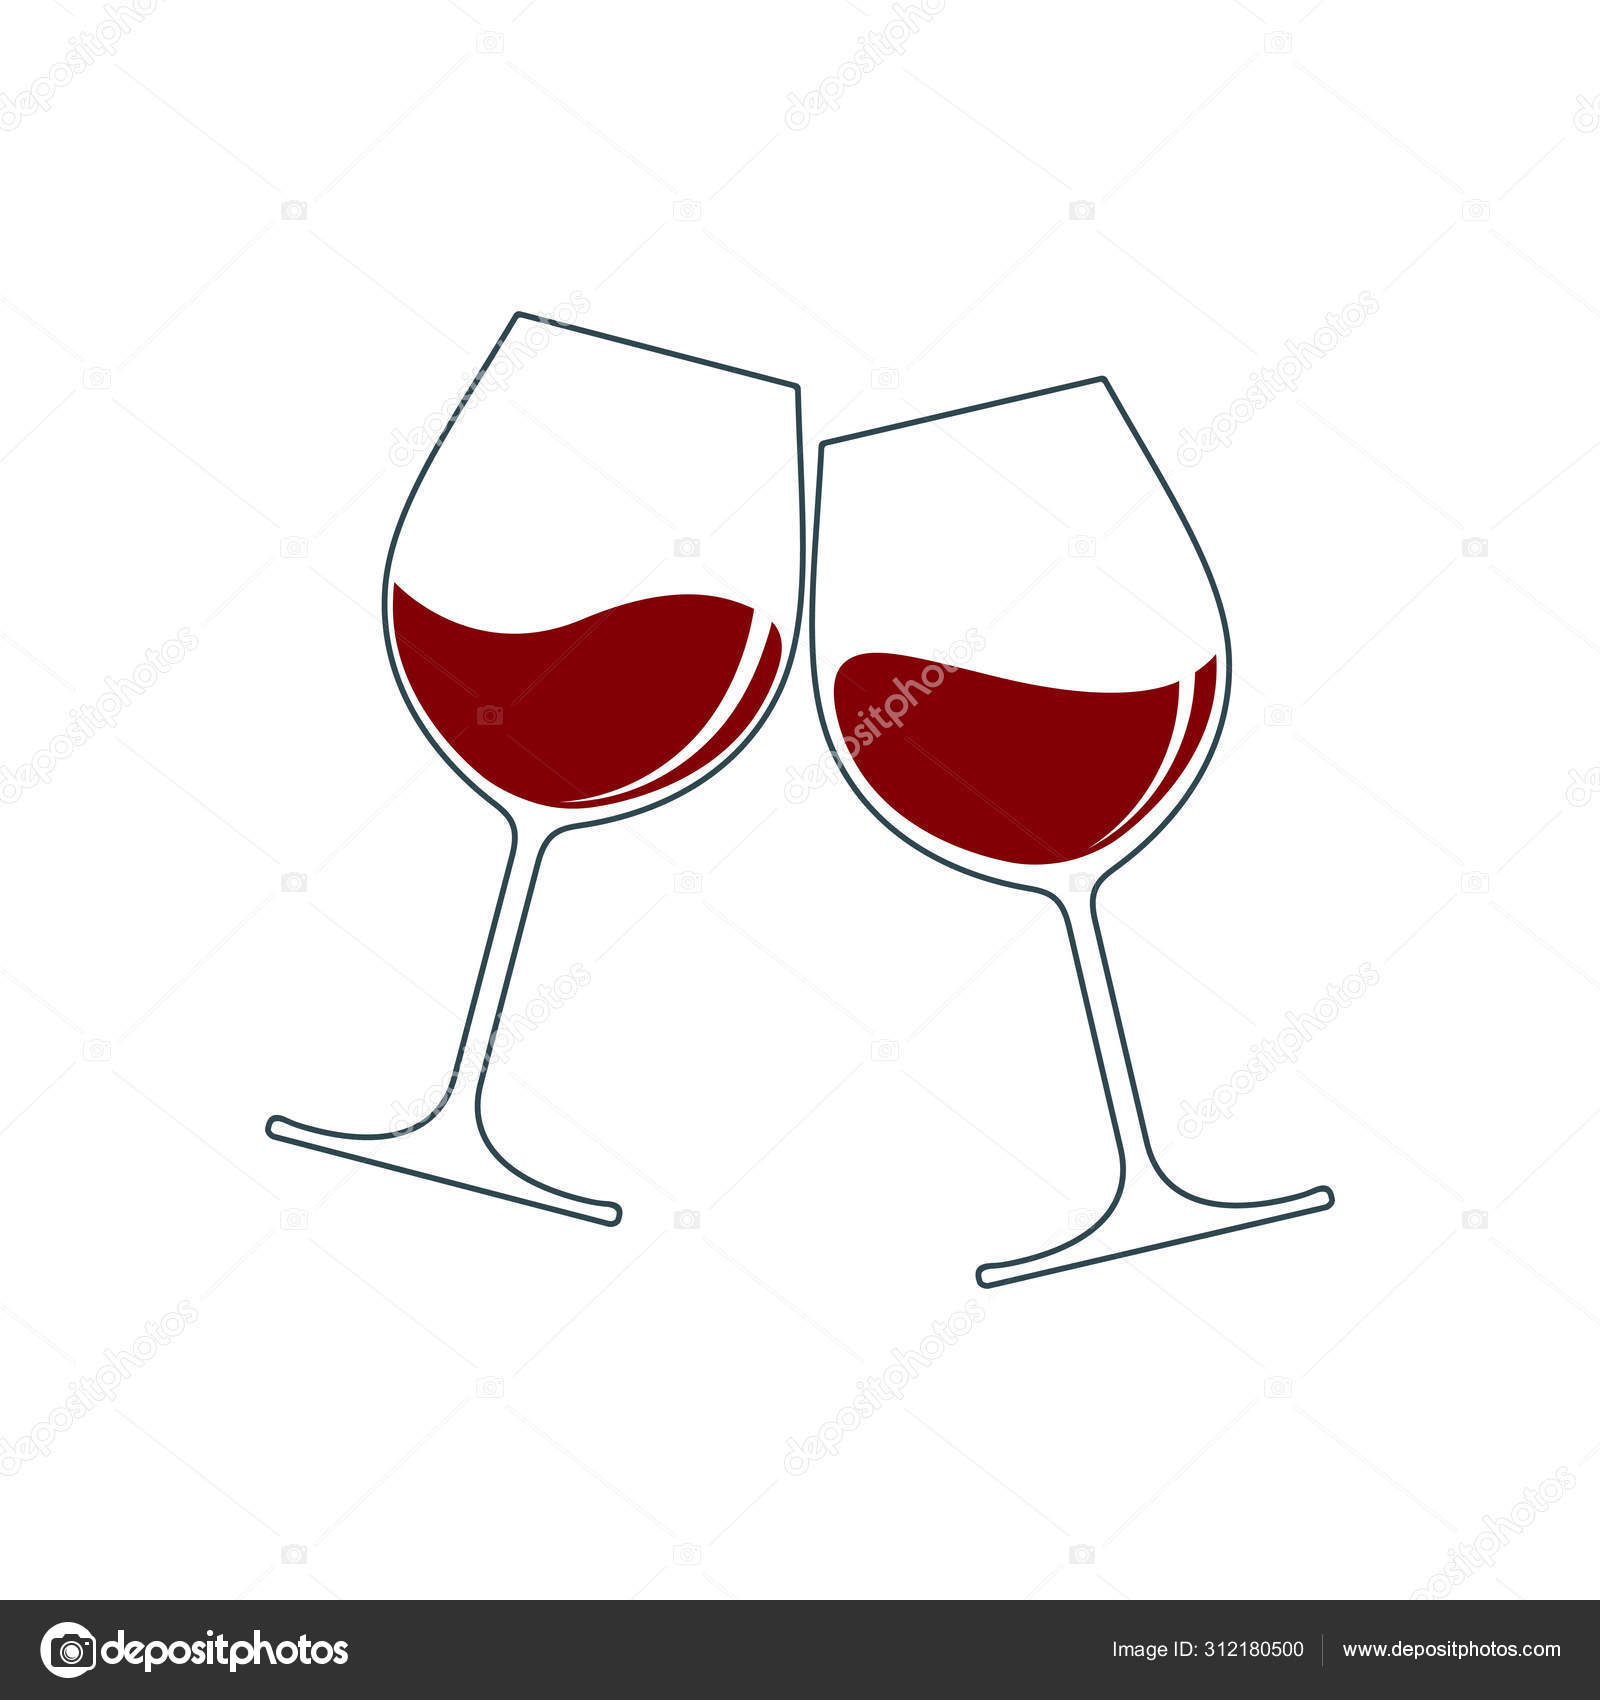 Clink wine Vector by 312180500